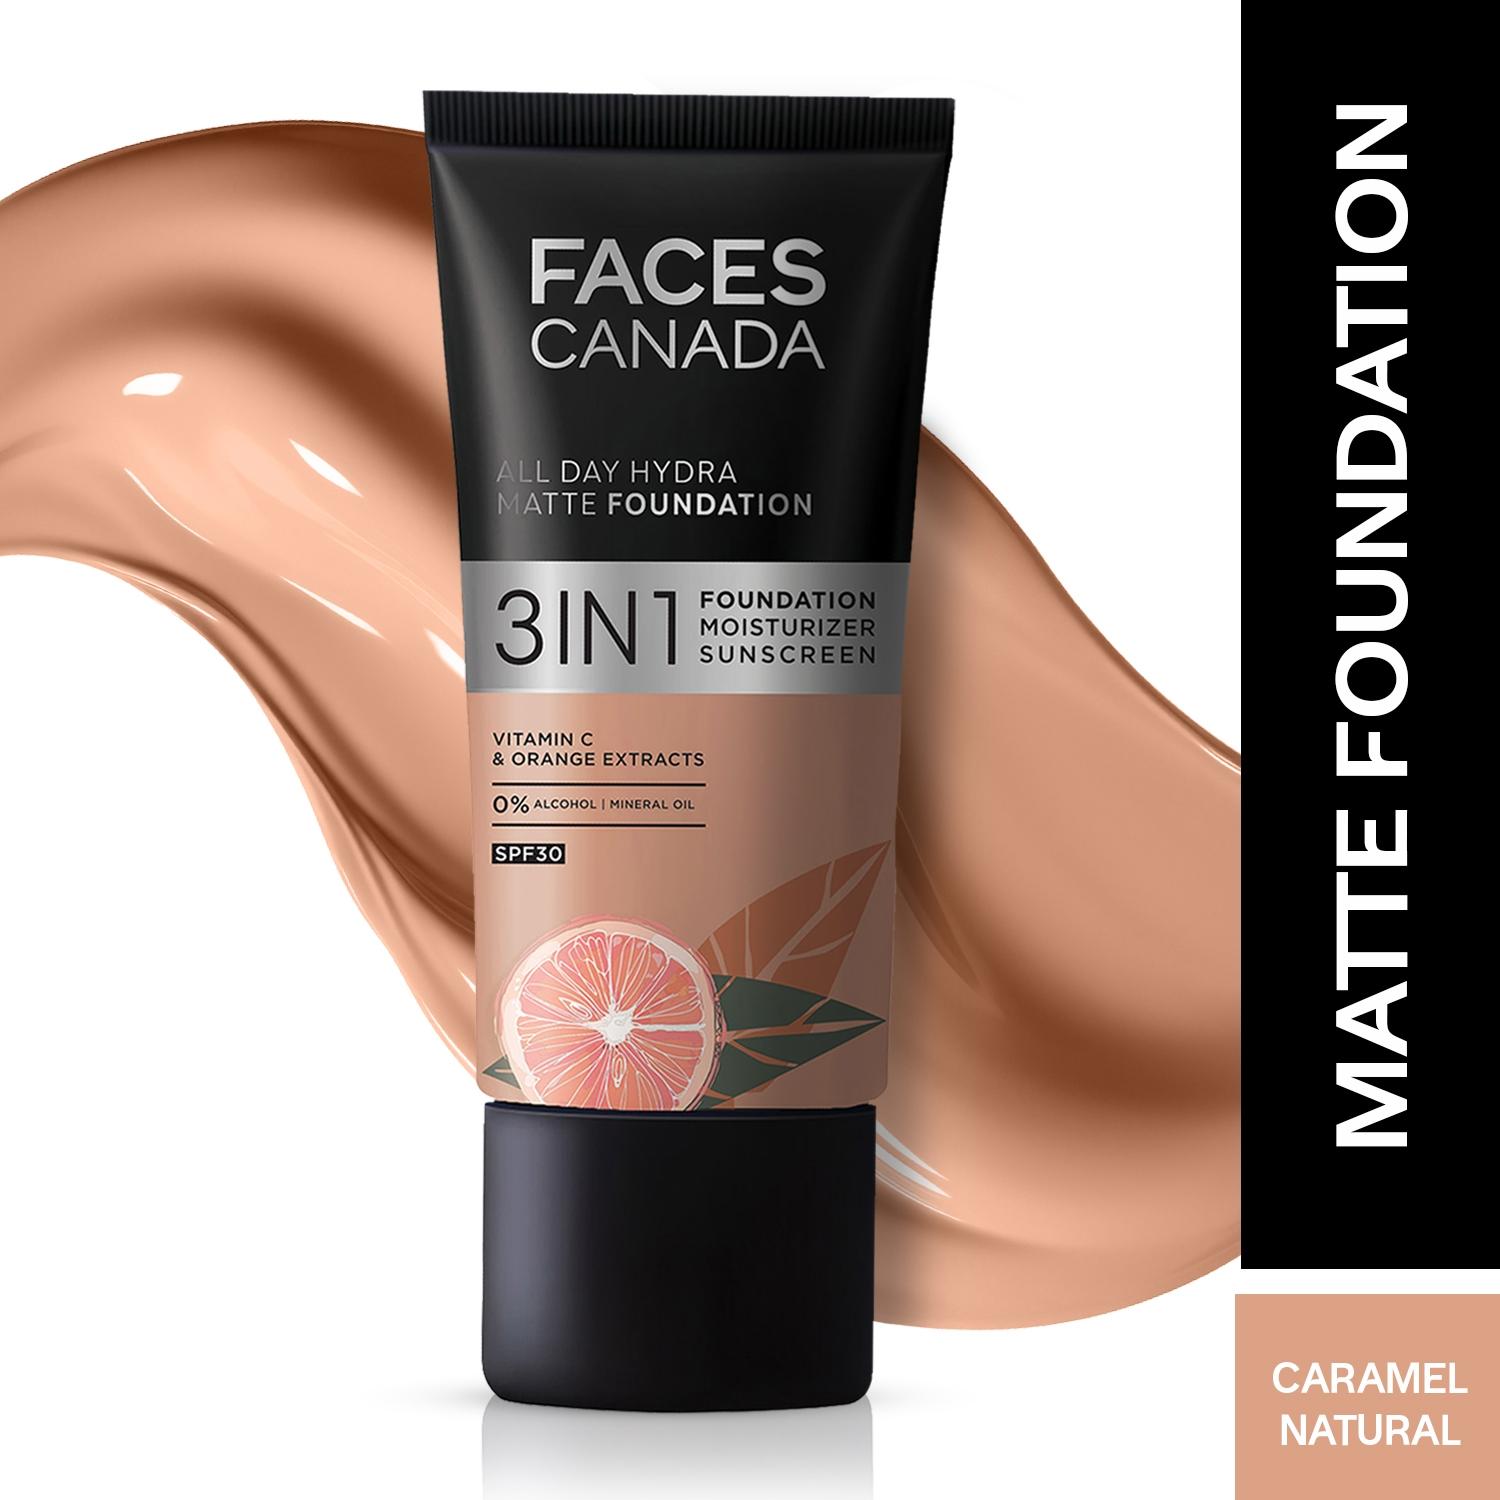 faces canada all day hydra matte foundation - 23 caramel natural (25ml)